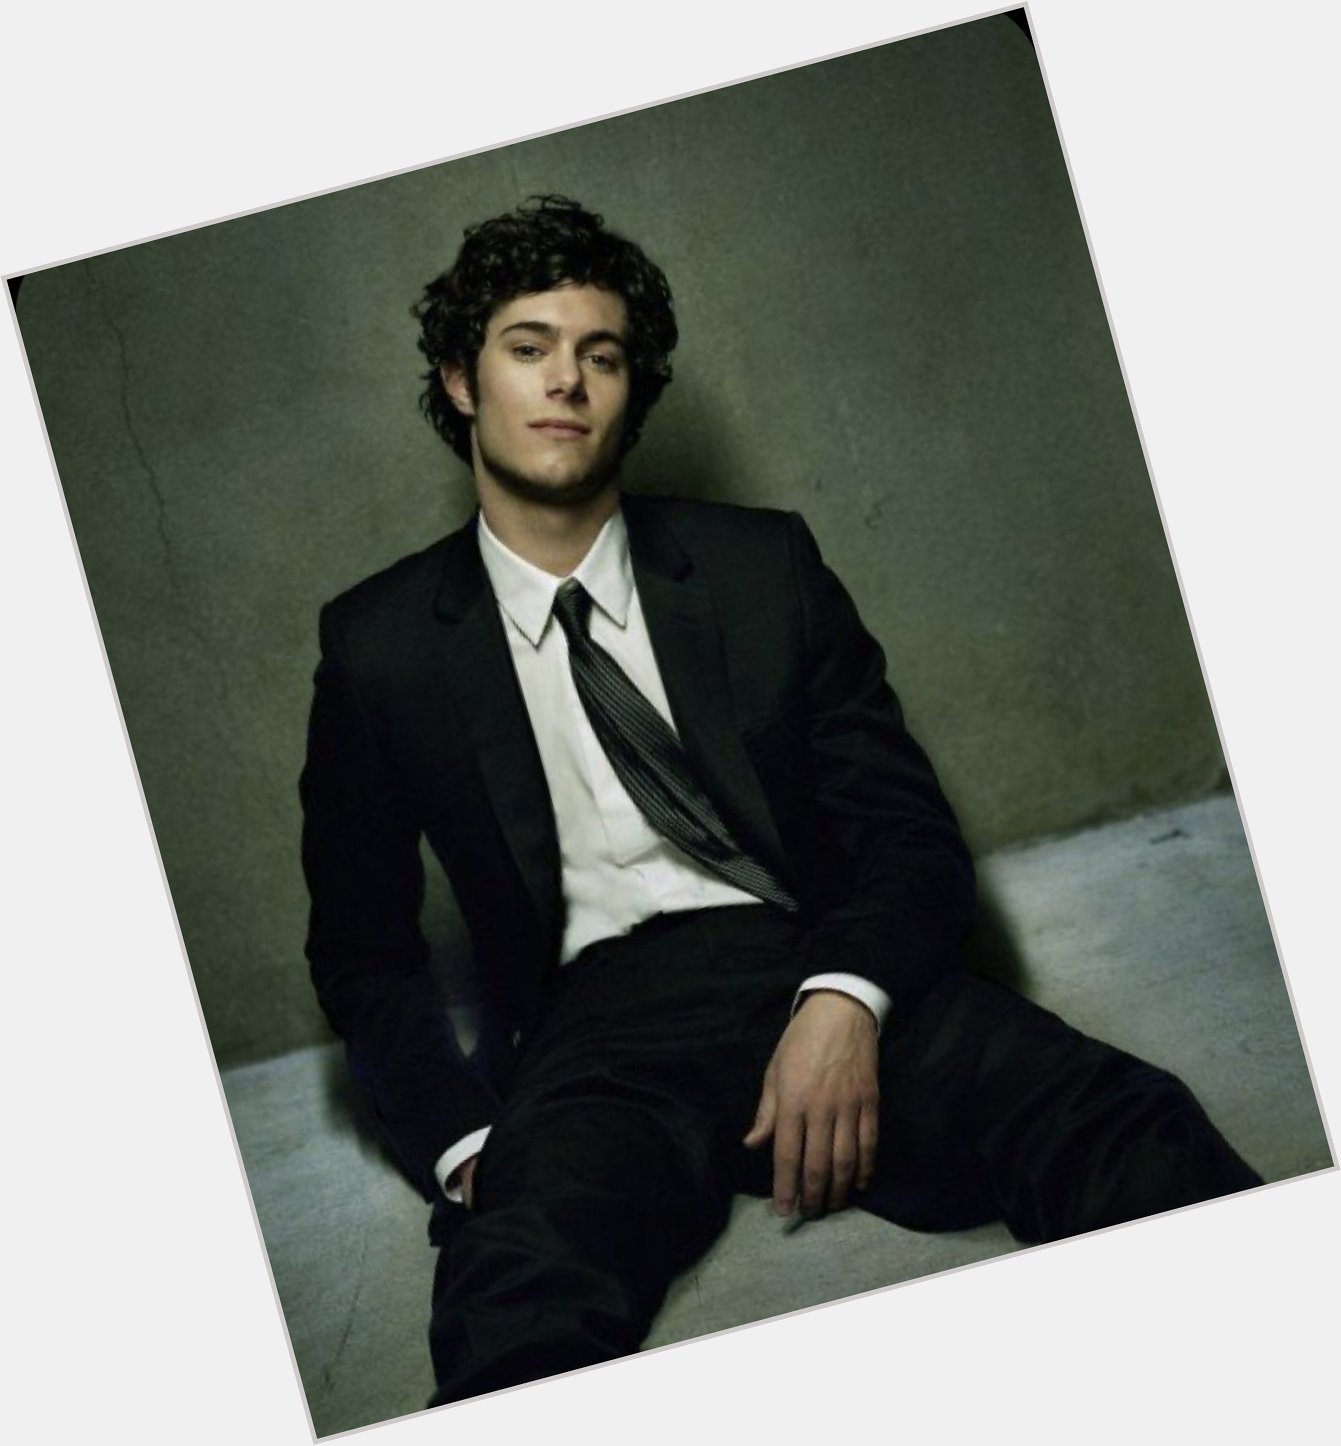 Happy birthday adam brody the love of my life plz forget our 25 year age gap i m here if u want me 